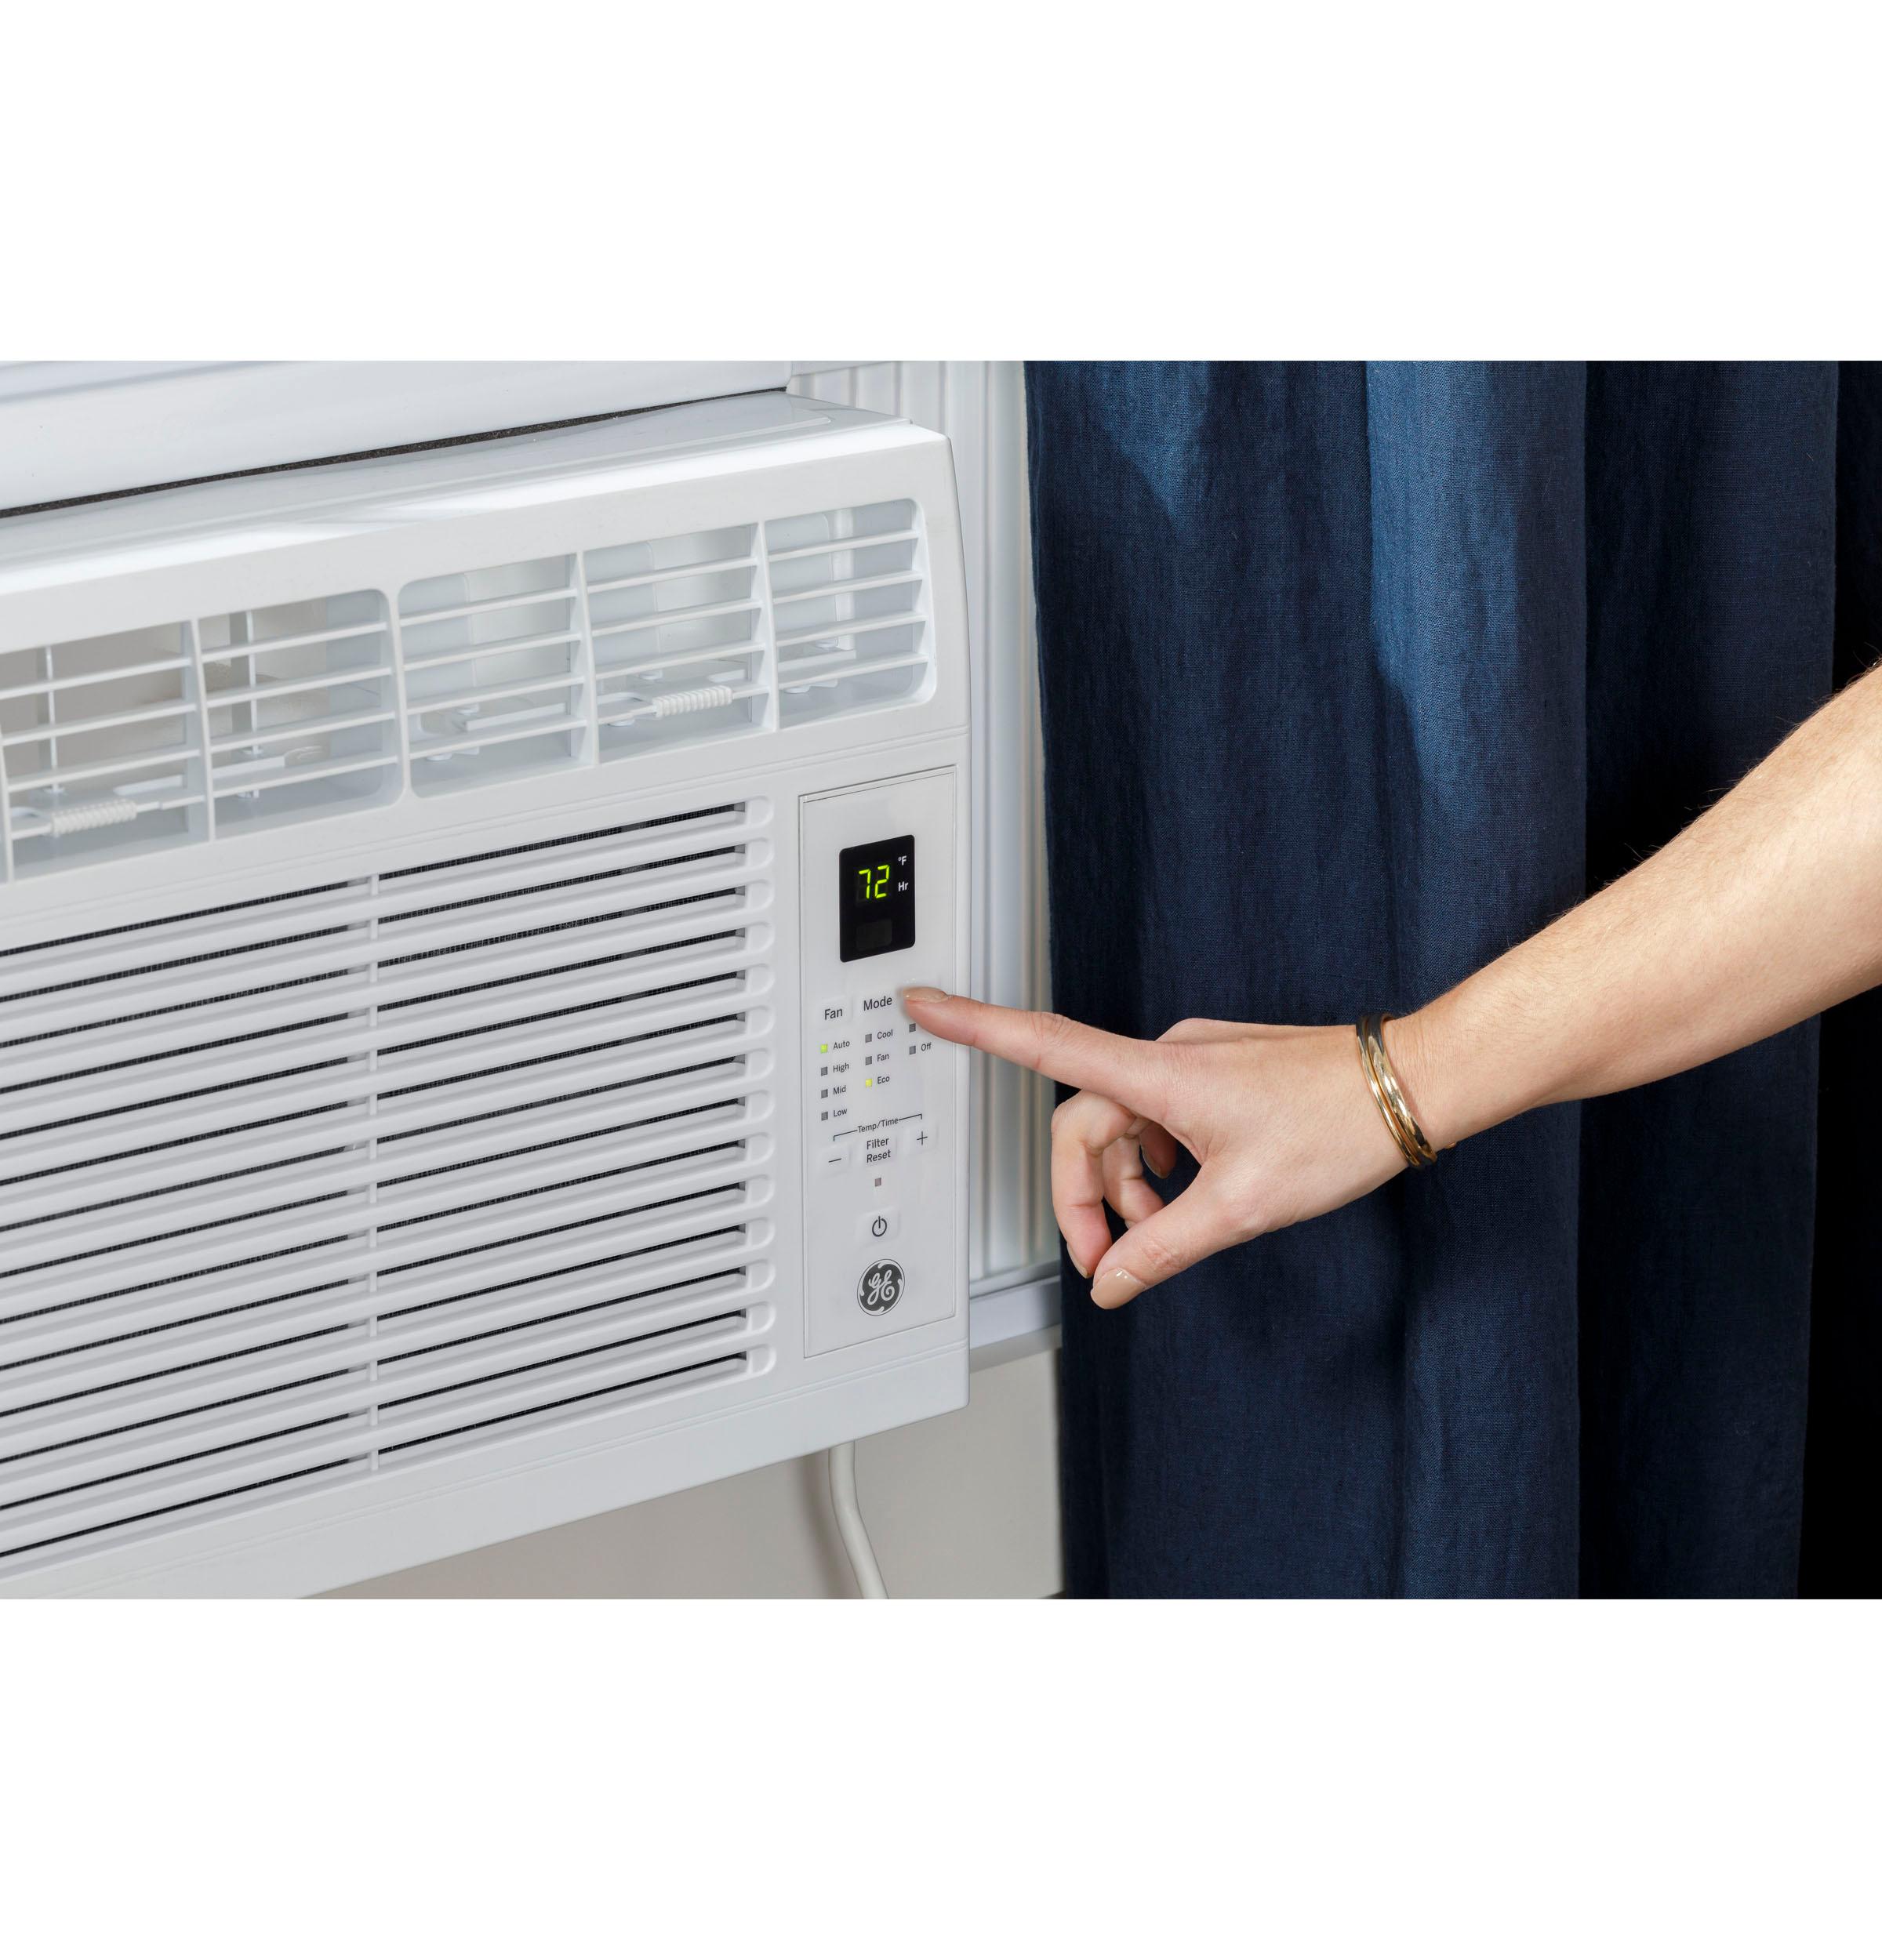 Ge Appliances AHW05LZ Ge® 5,000 Btu Electronic Window Air Conditioner For Small Rooms Up To 150 Sq Ft.